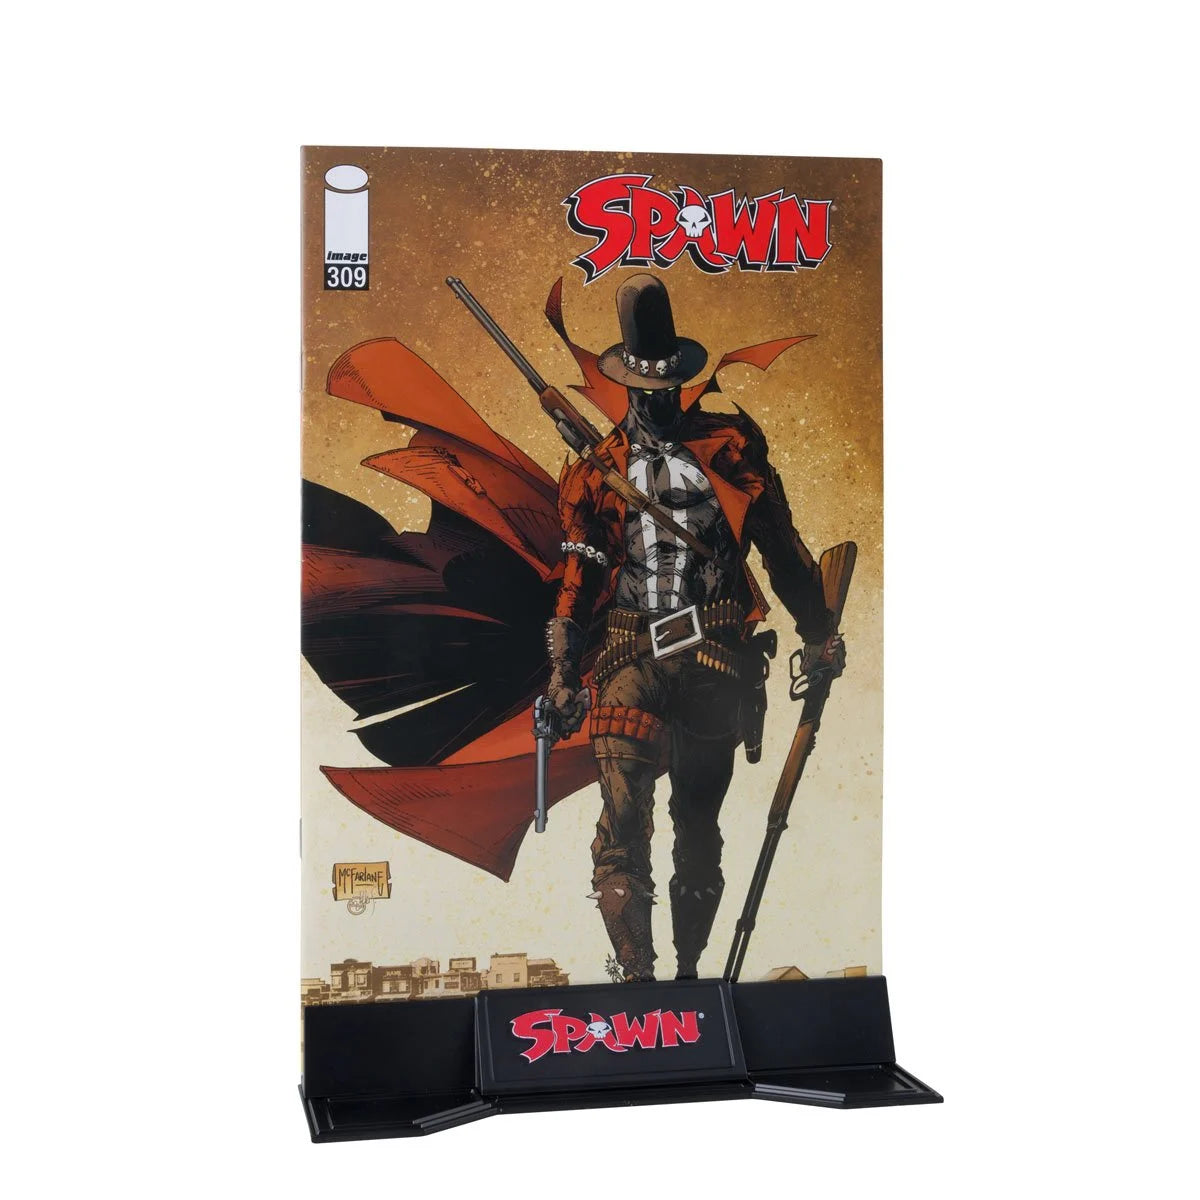 Spawn Page Punchers - WV1 - Gunslinger and Auger Action Figure (Spawn #309) - 3IN Figure with Comic 2PK